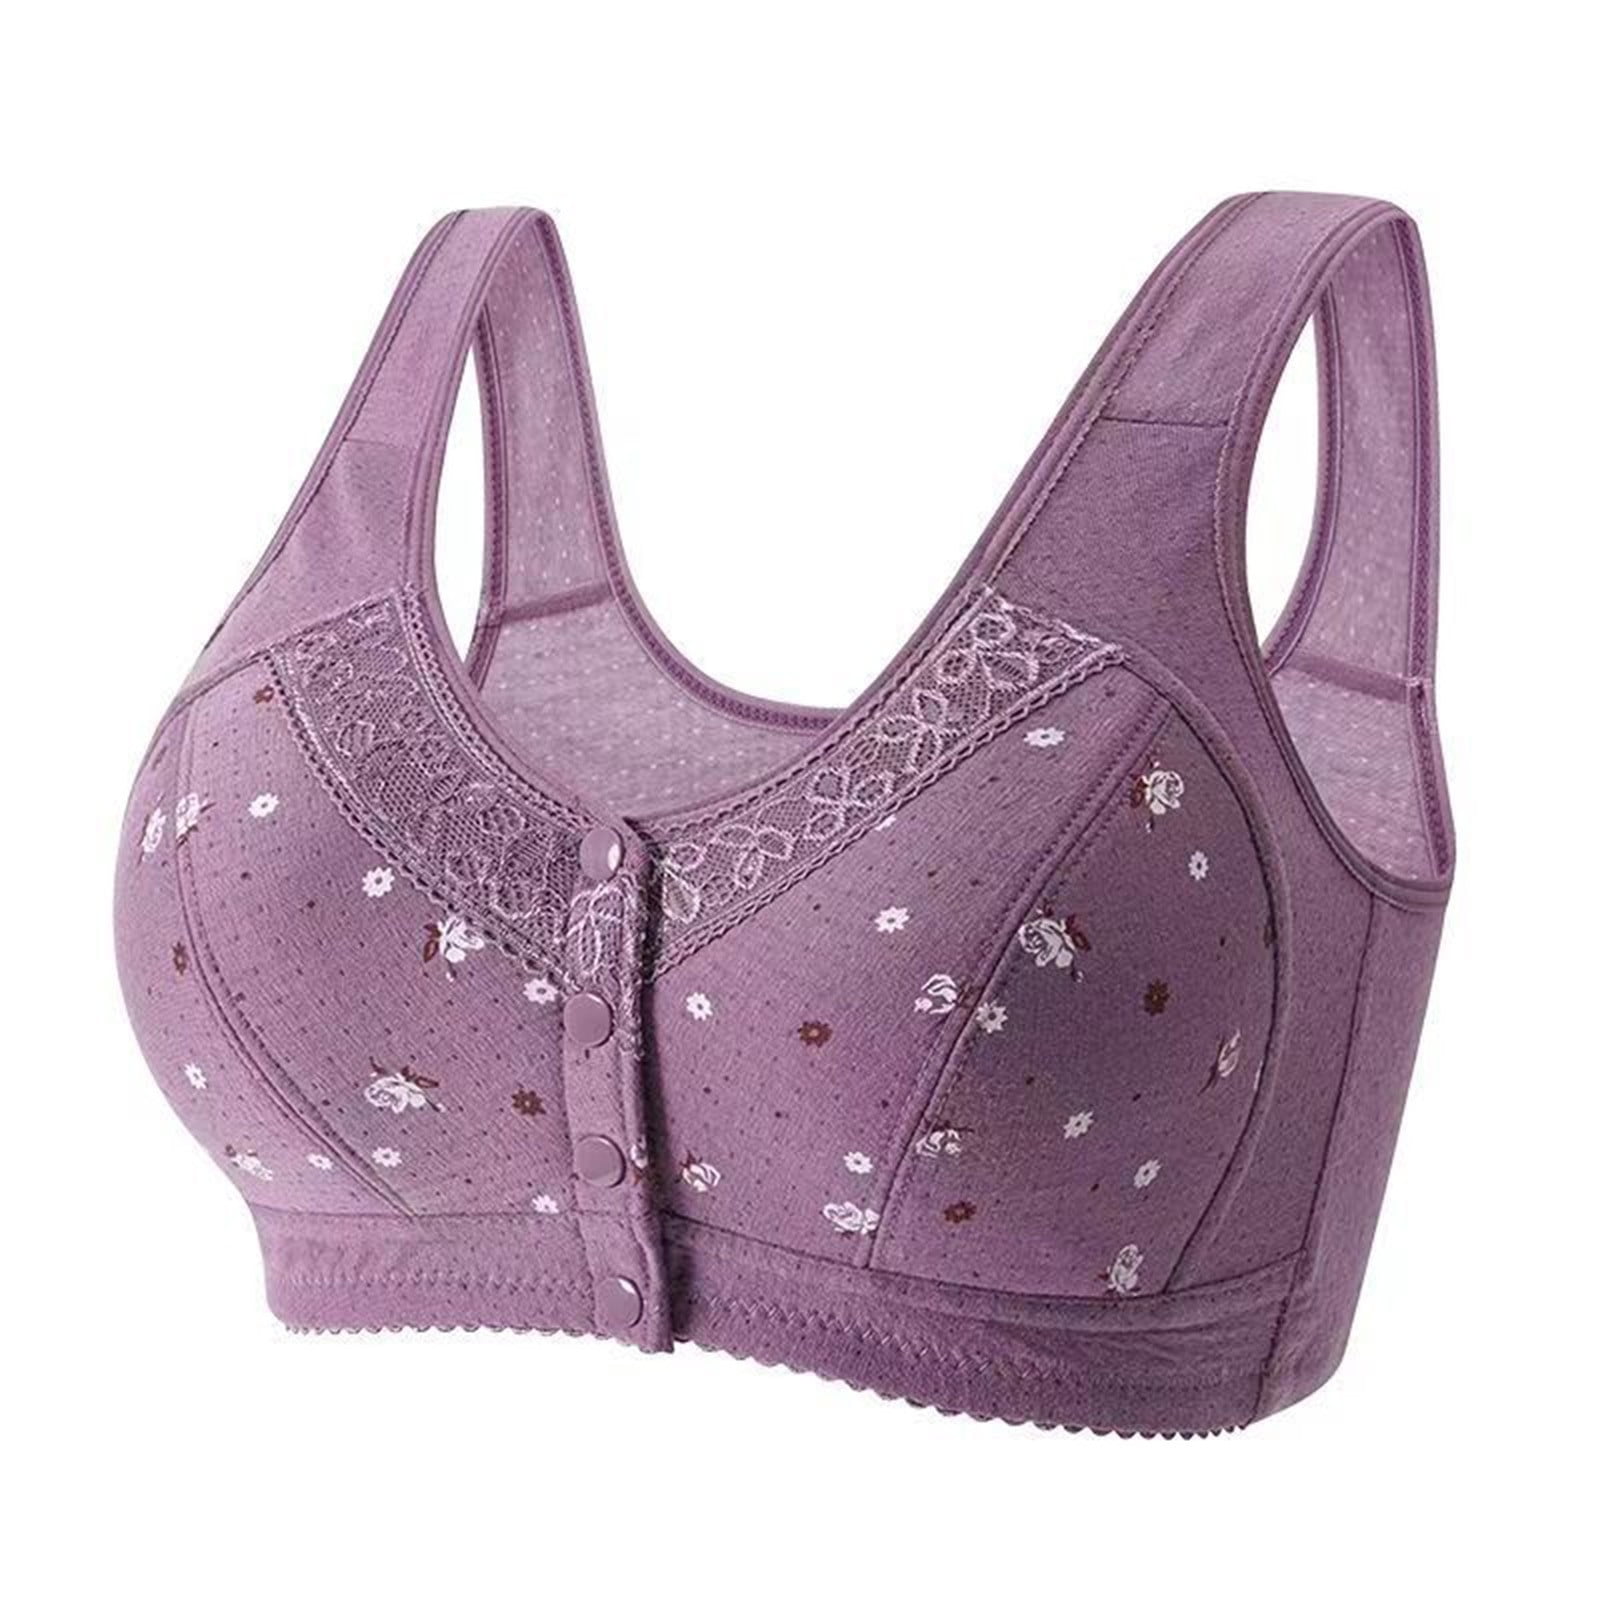 Xiaojmake 3 Pack Front Button Bra for Mom Grandma Front Closure